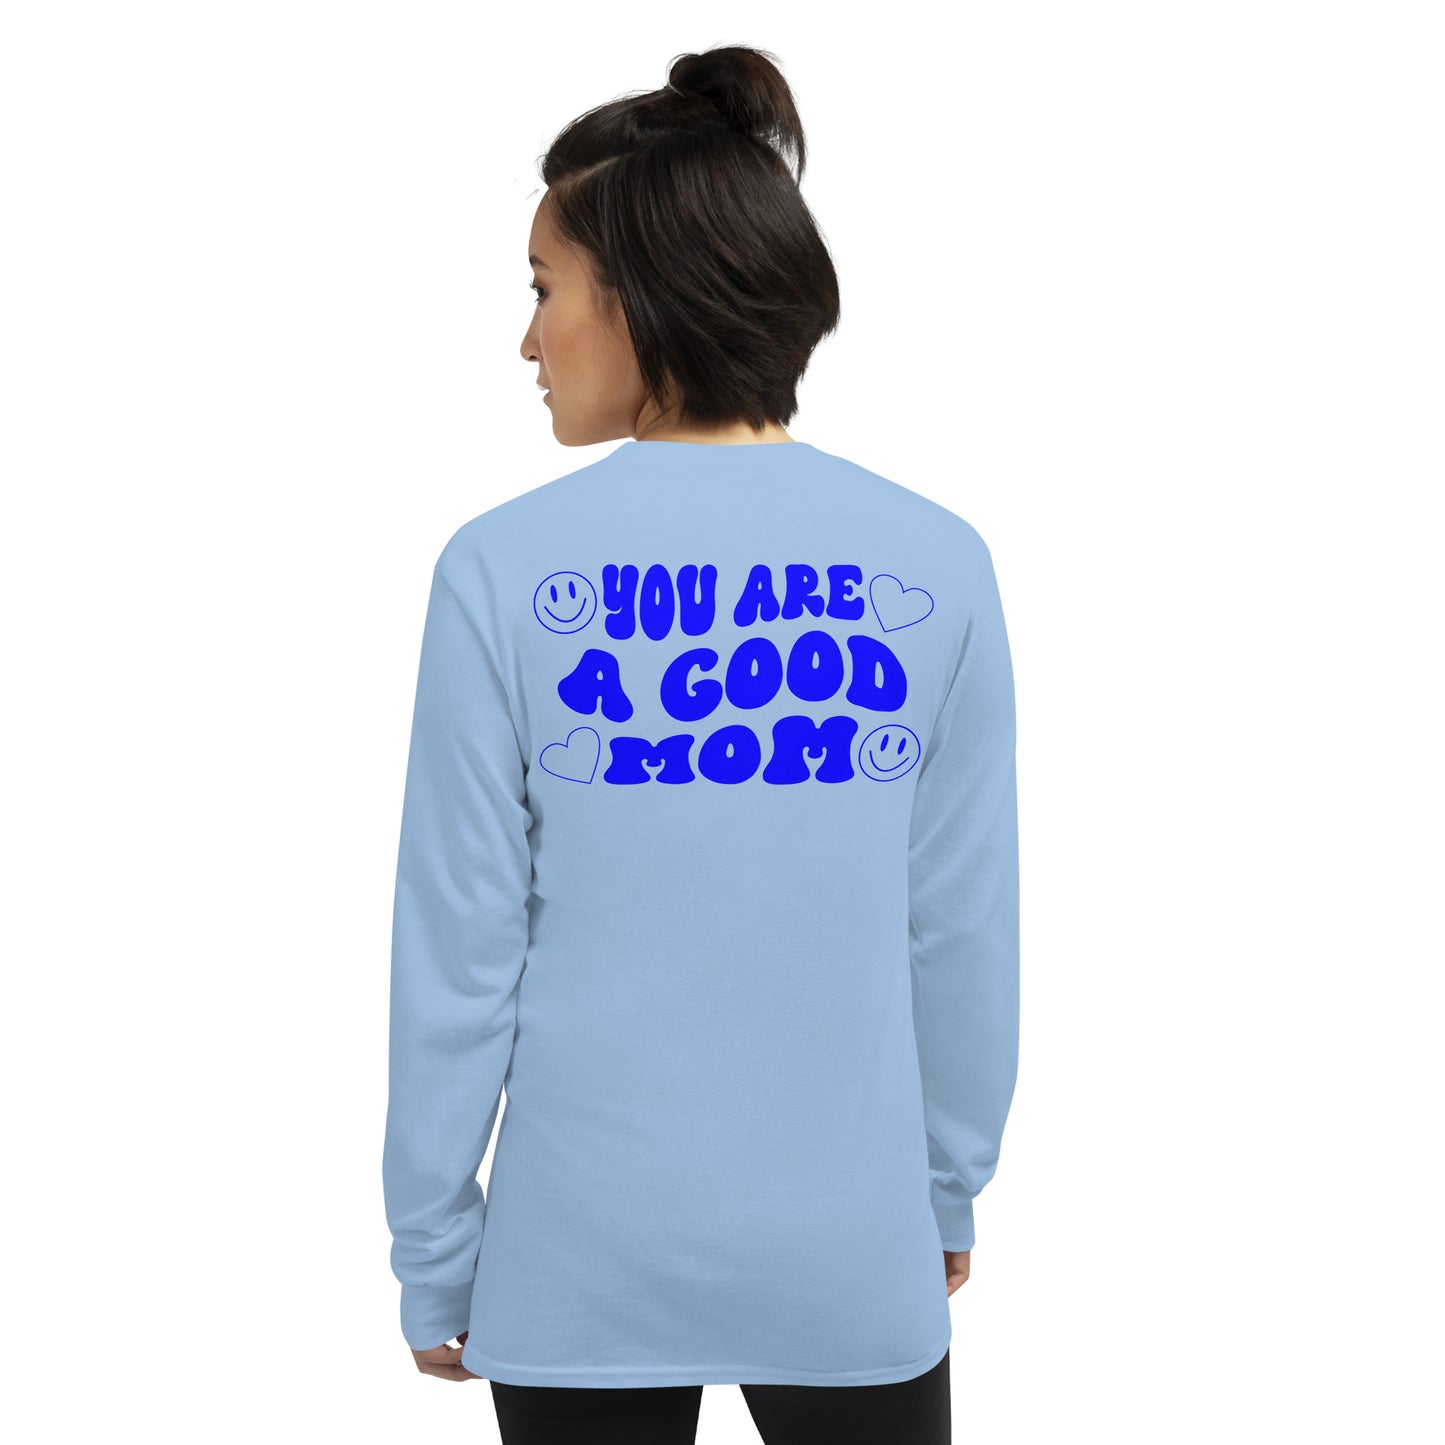 You are a good mom t-shirt